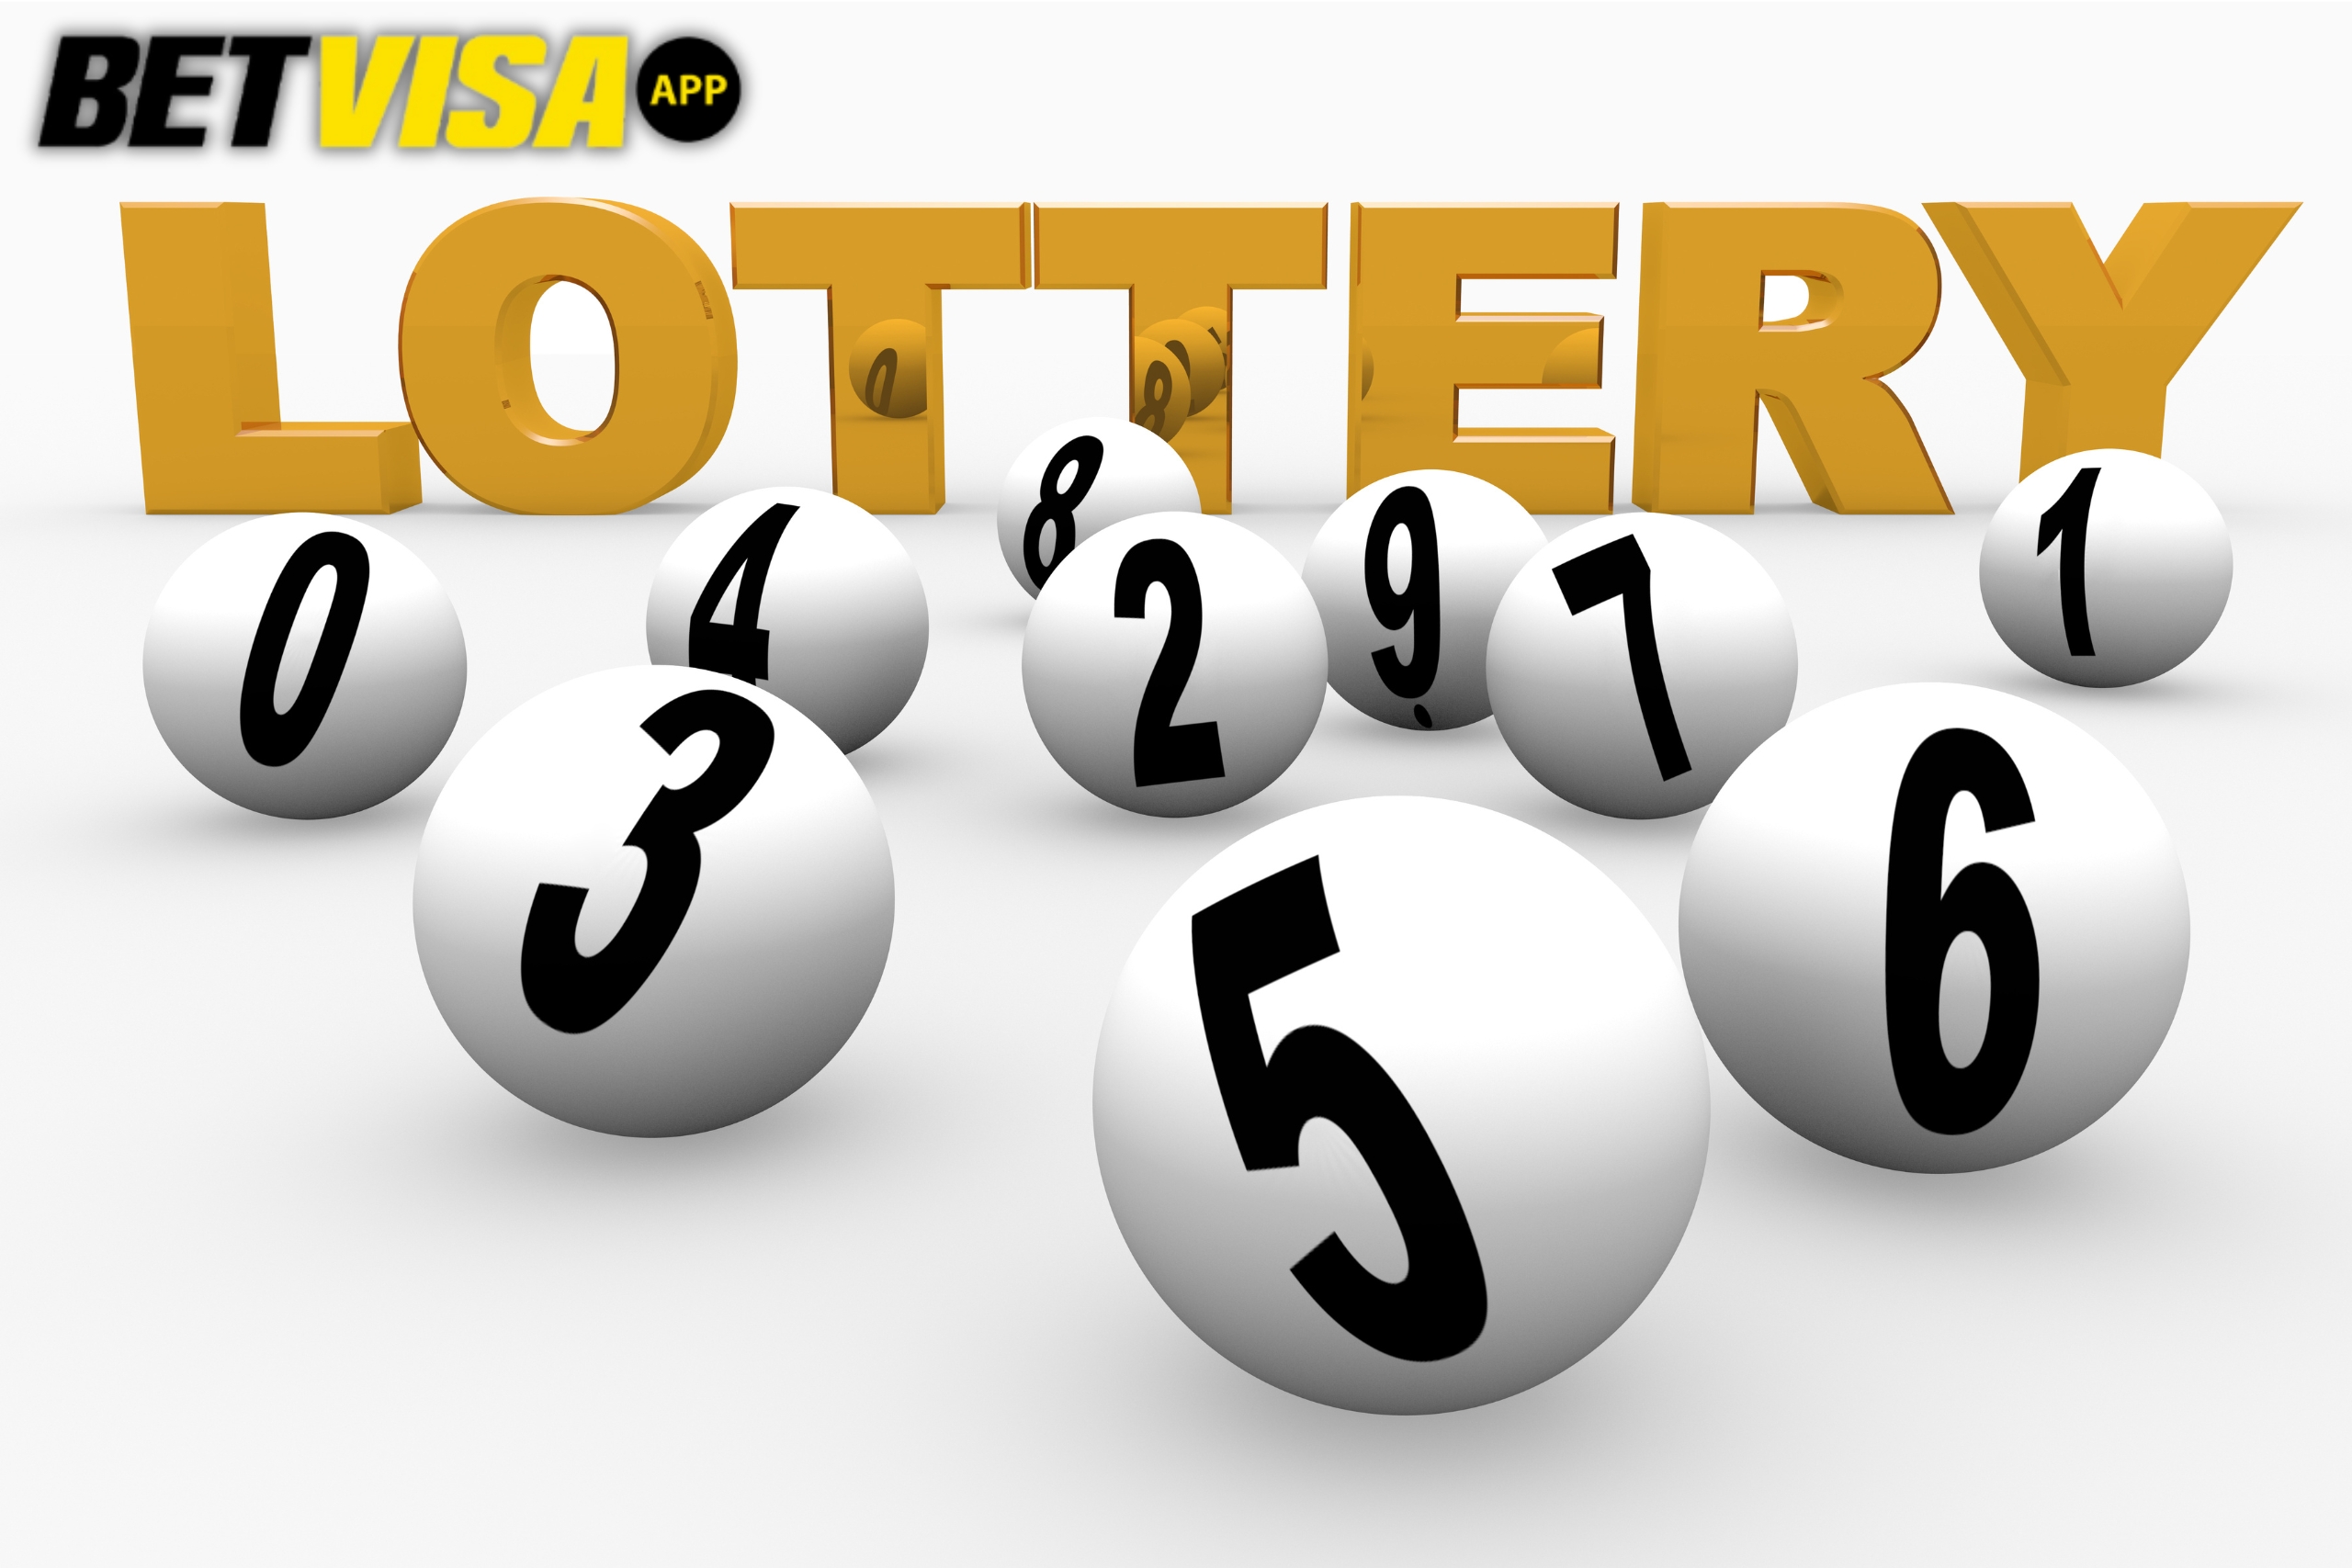 The Ultimate Guide To Winning With BetVisa App's Lottery Game